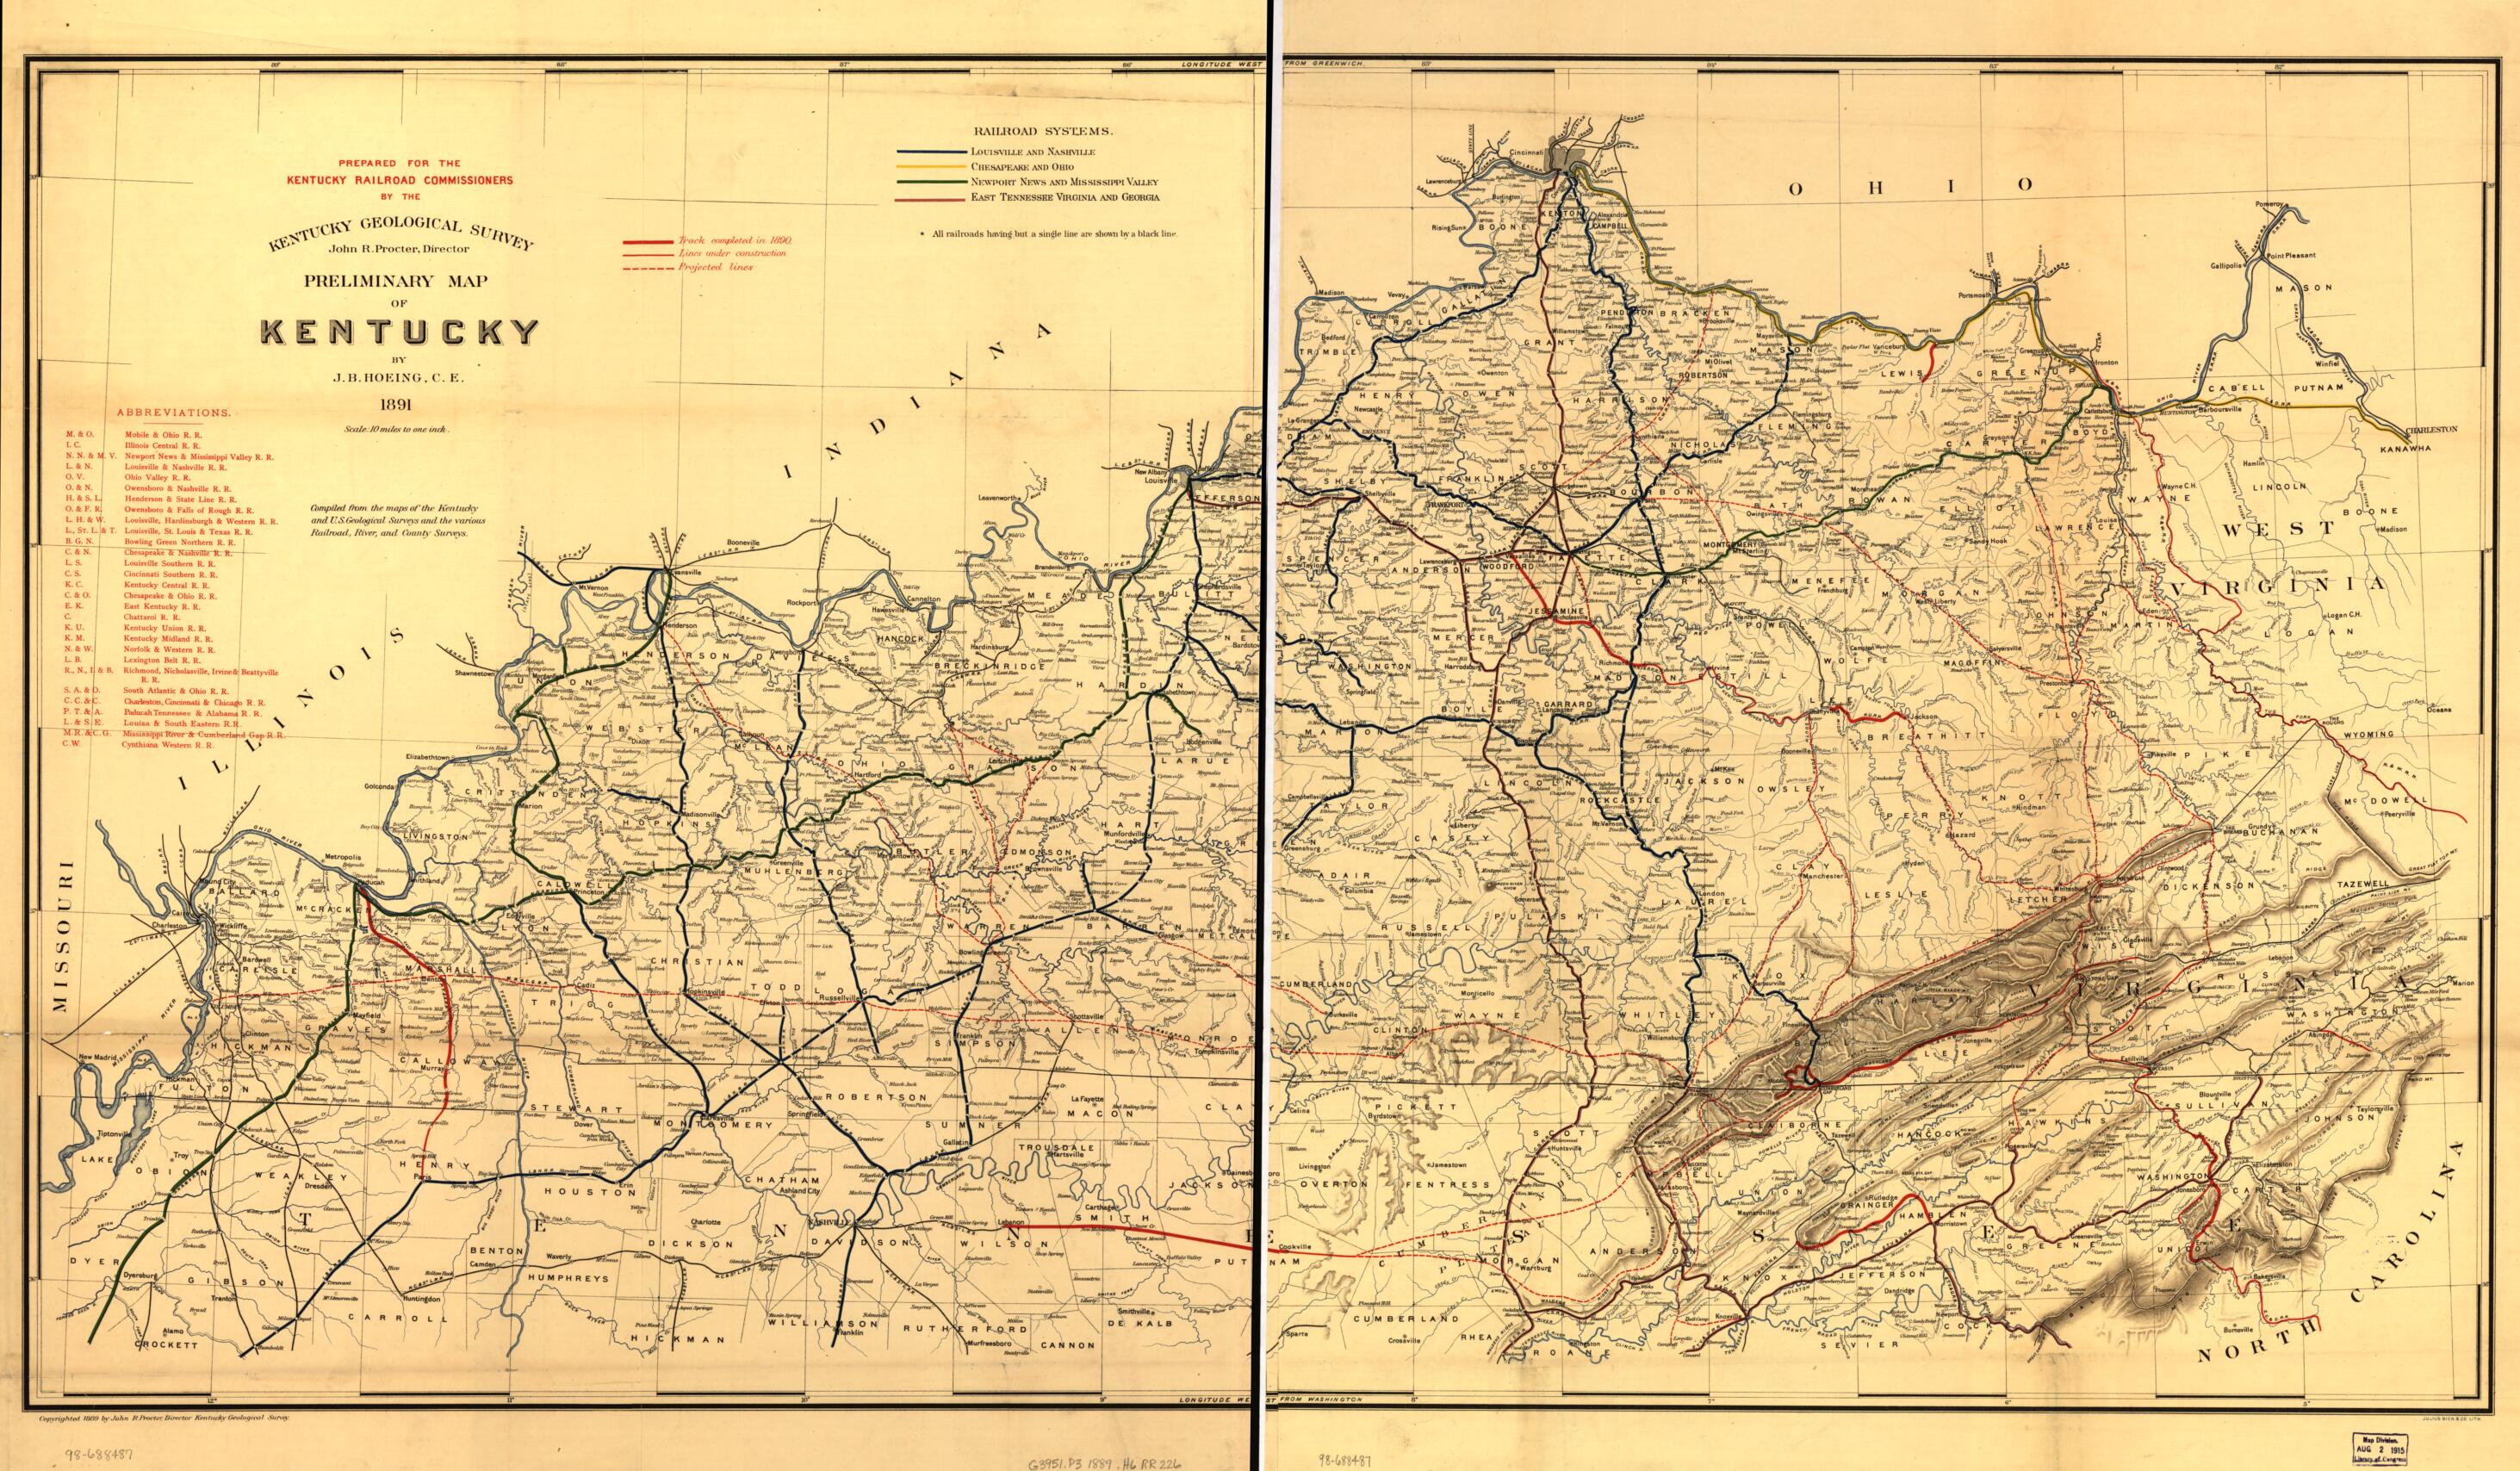 This old map of Preliminary Map of Kentucky 1891. Prepared for the Kentucky Railroad Commissioners by the Kentucky Geological Survey, John R. Procter, Director from 1889 was created by Joseph Bernard Hoeing in 1889